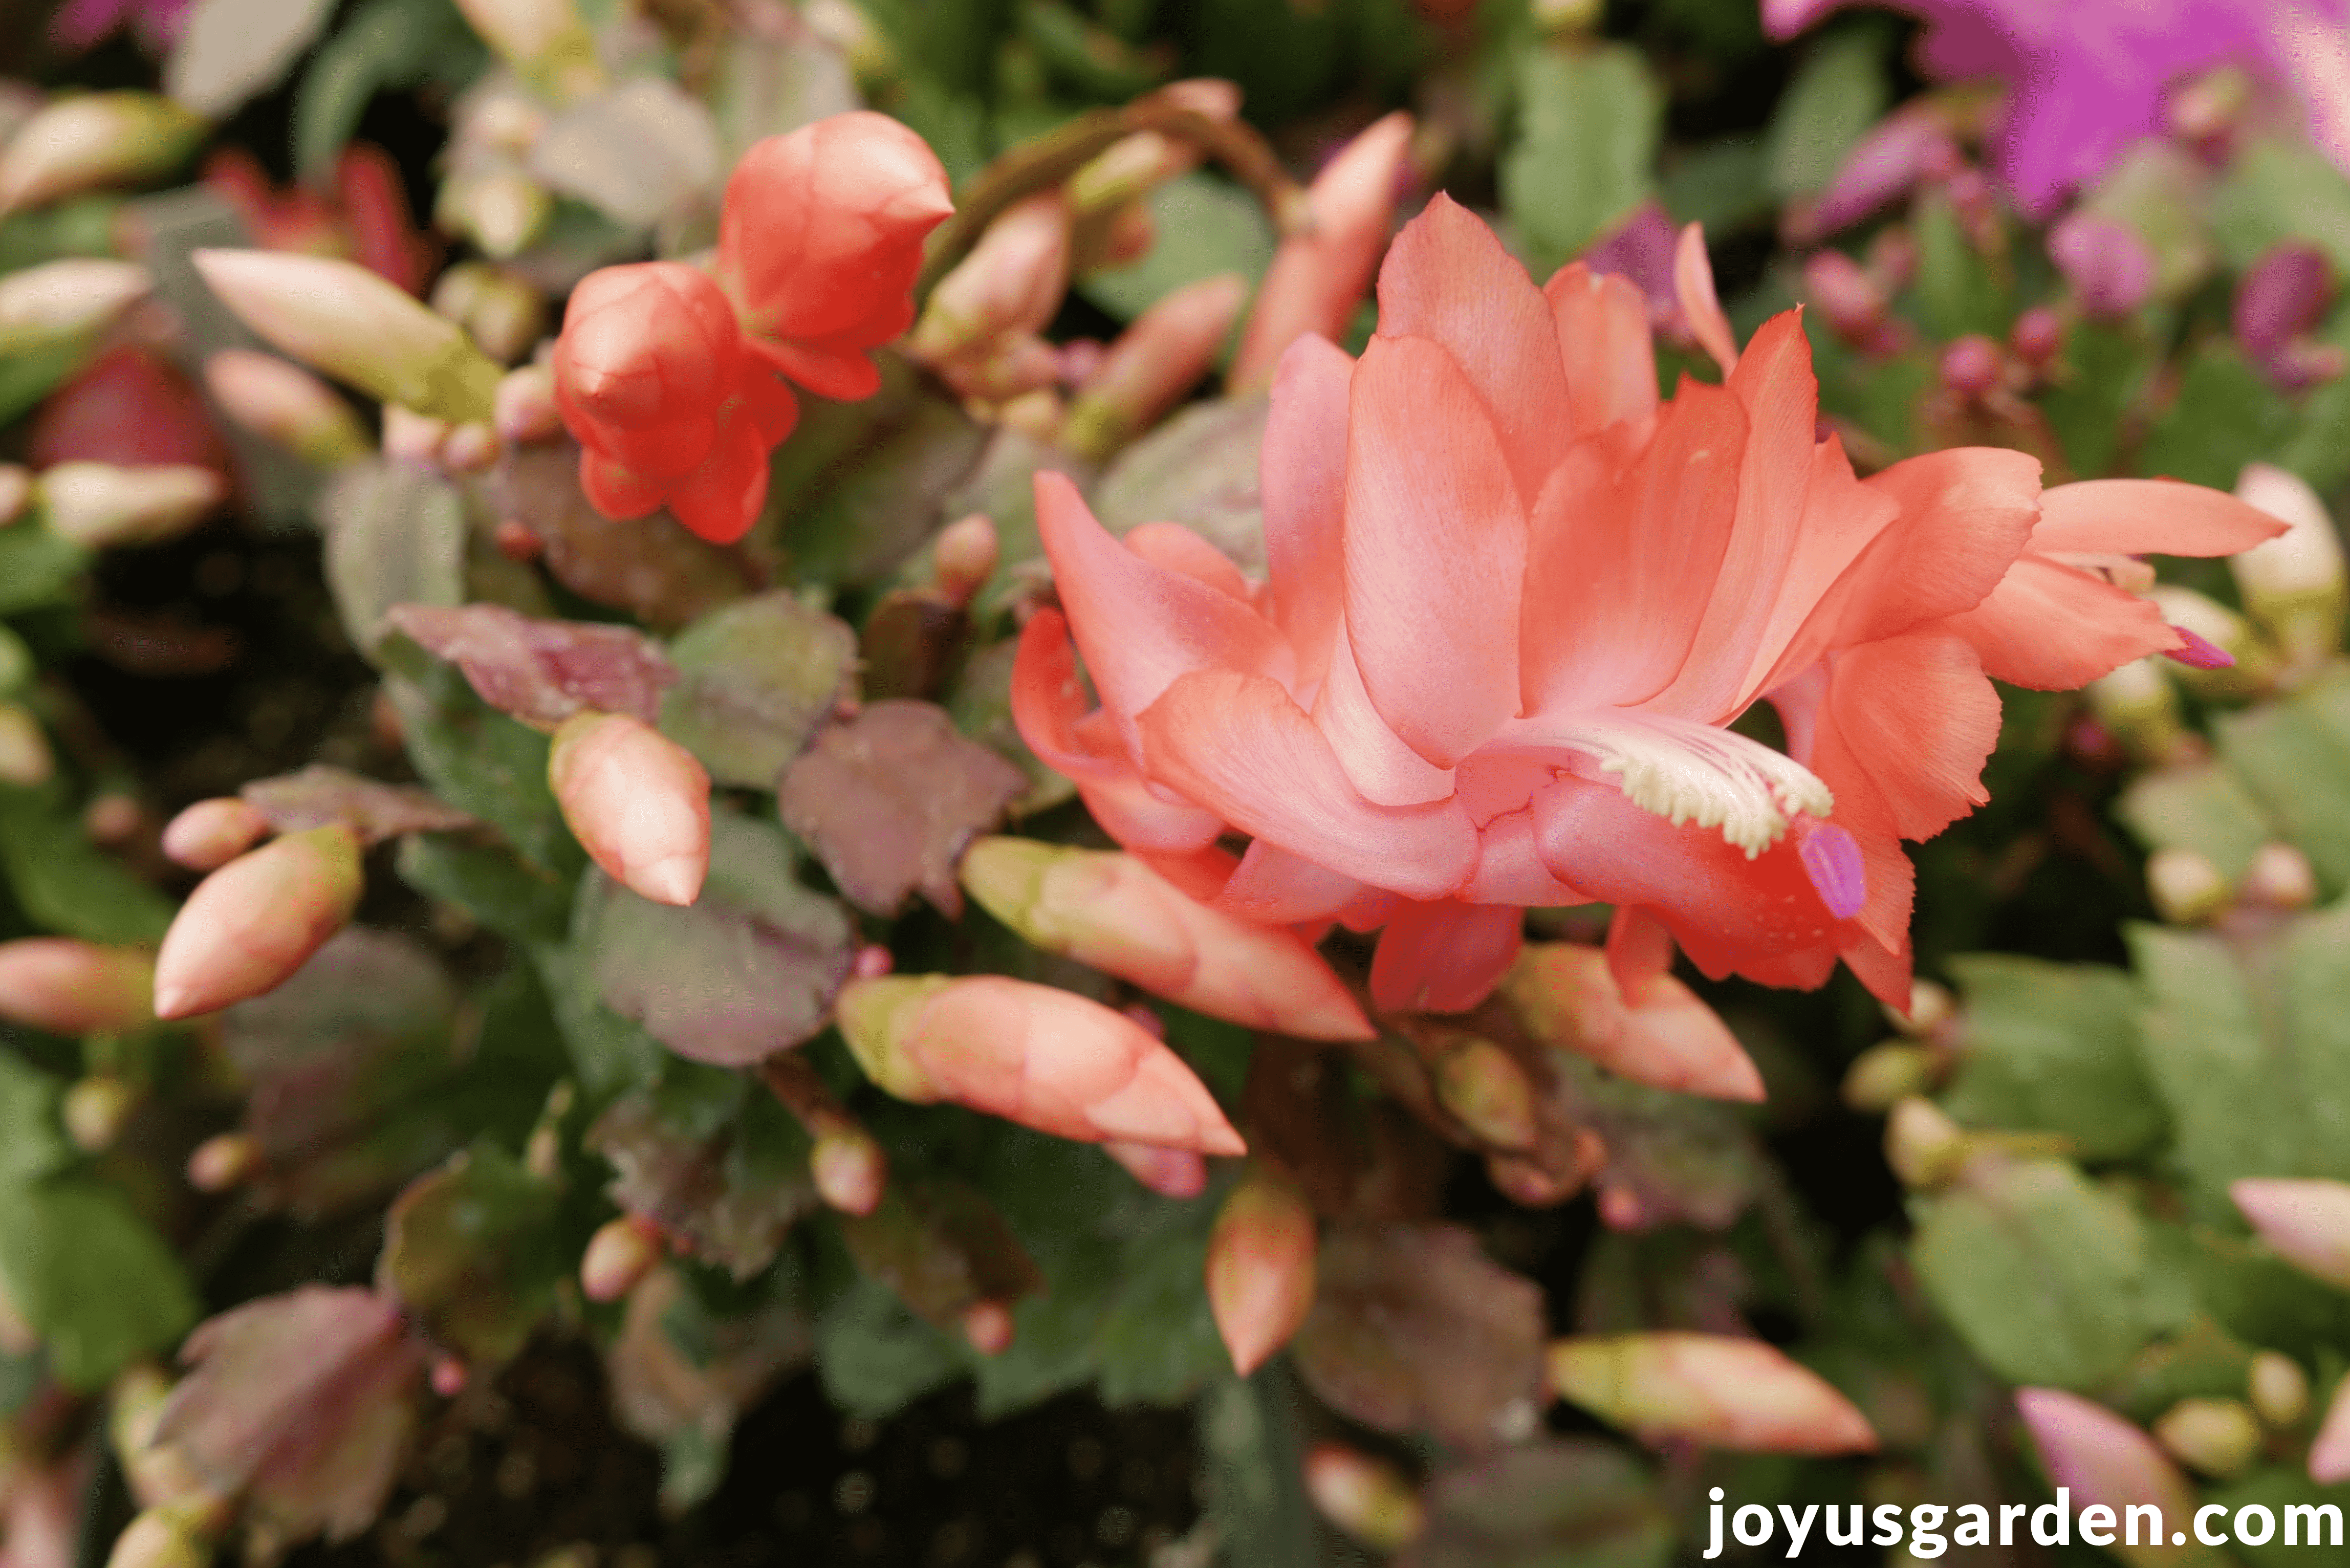 close up of a peach christmas cactus thanksgiving cactus with 1 bloom & many buds